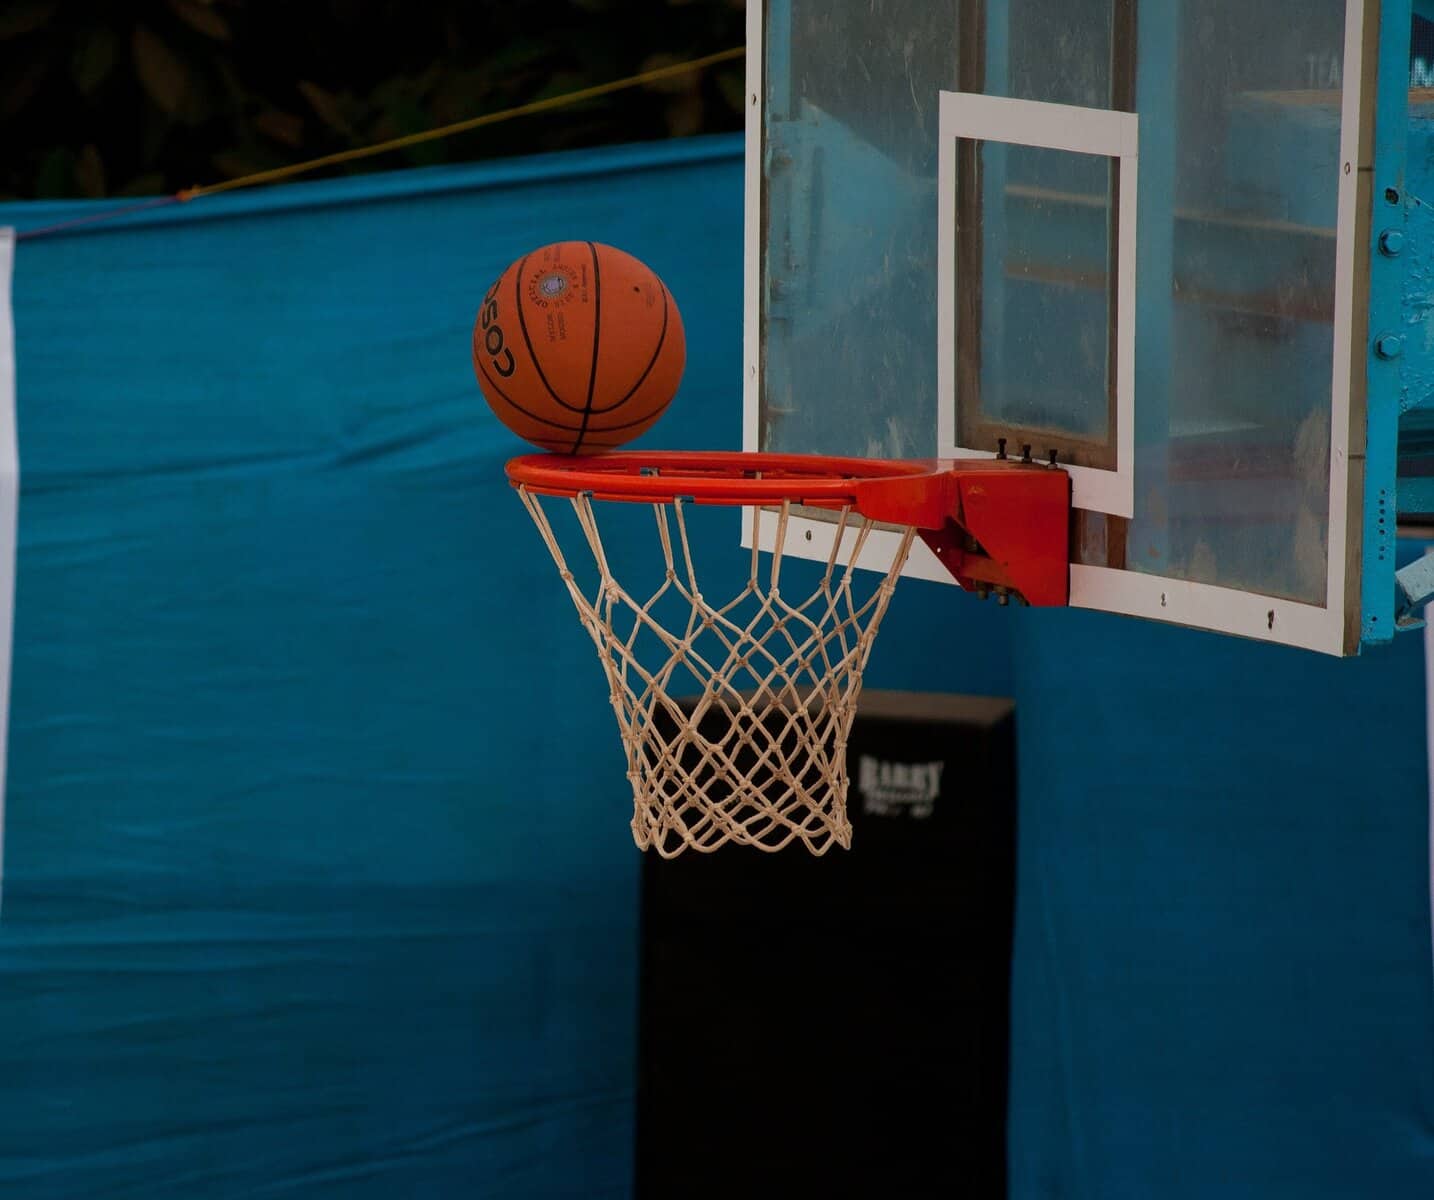 A basketball is seen at the rim of a hoop about to drop in.